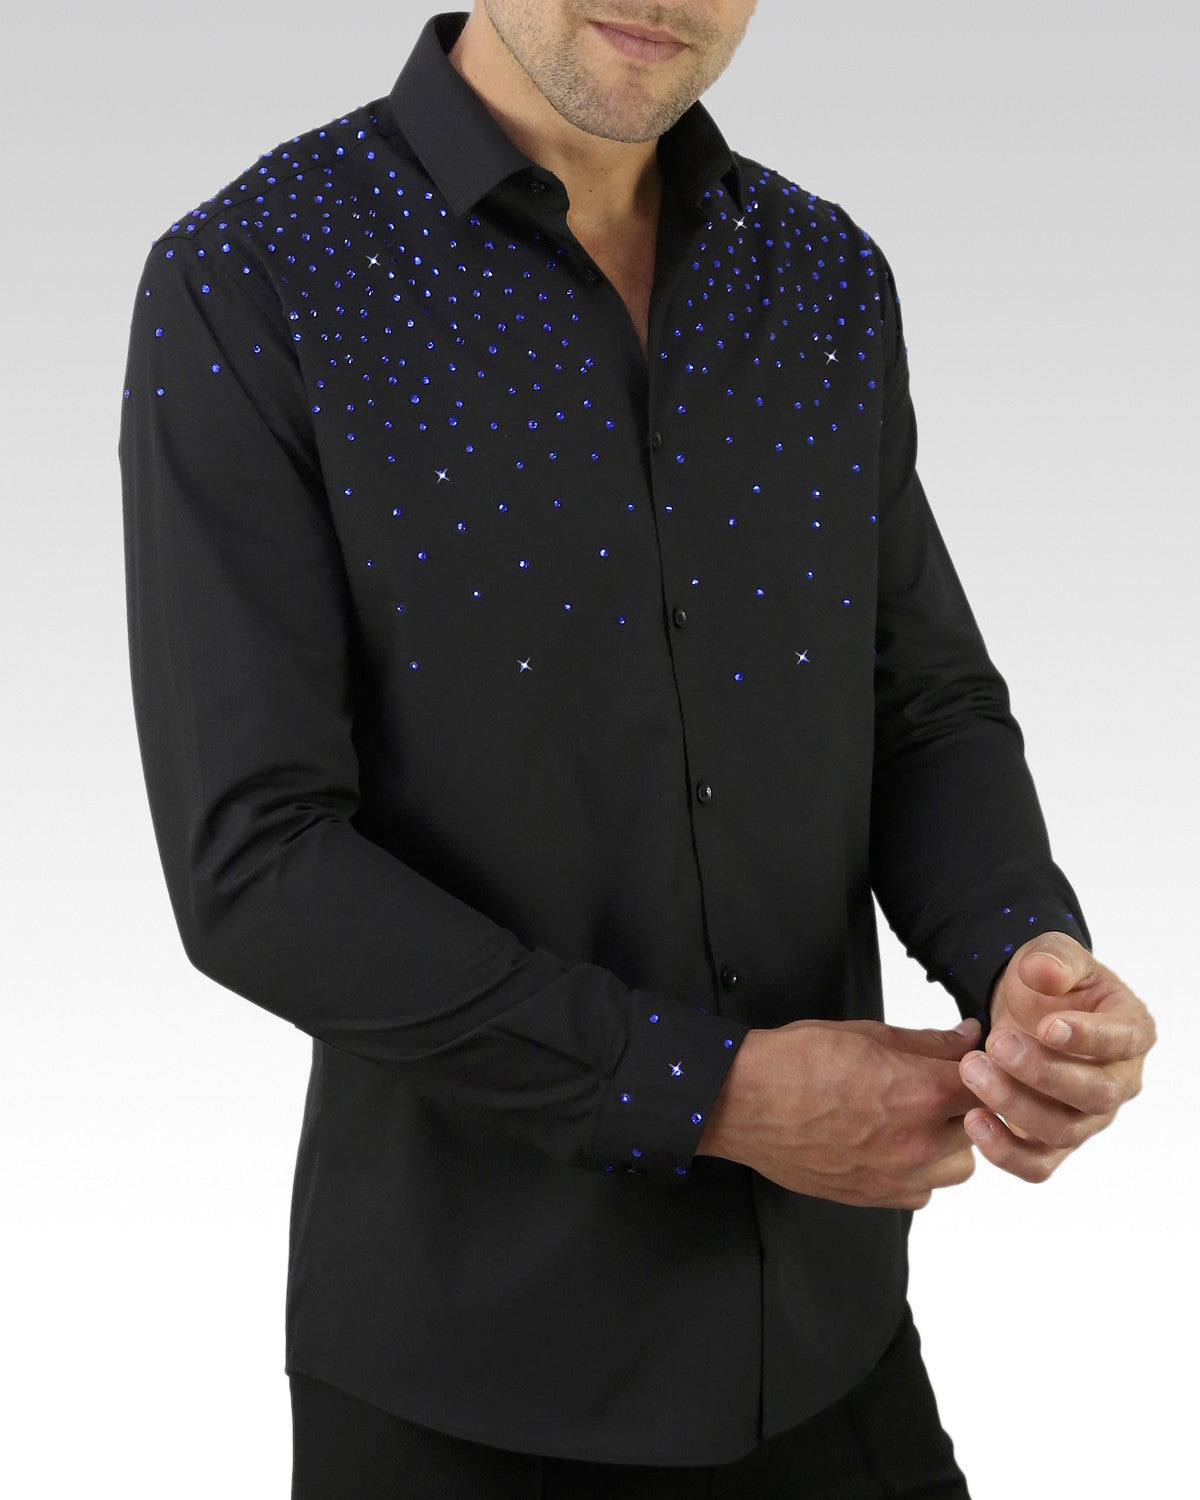 mens competition dance shirt